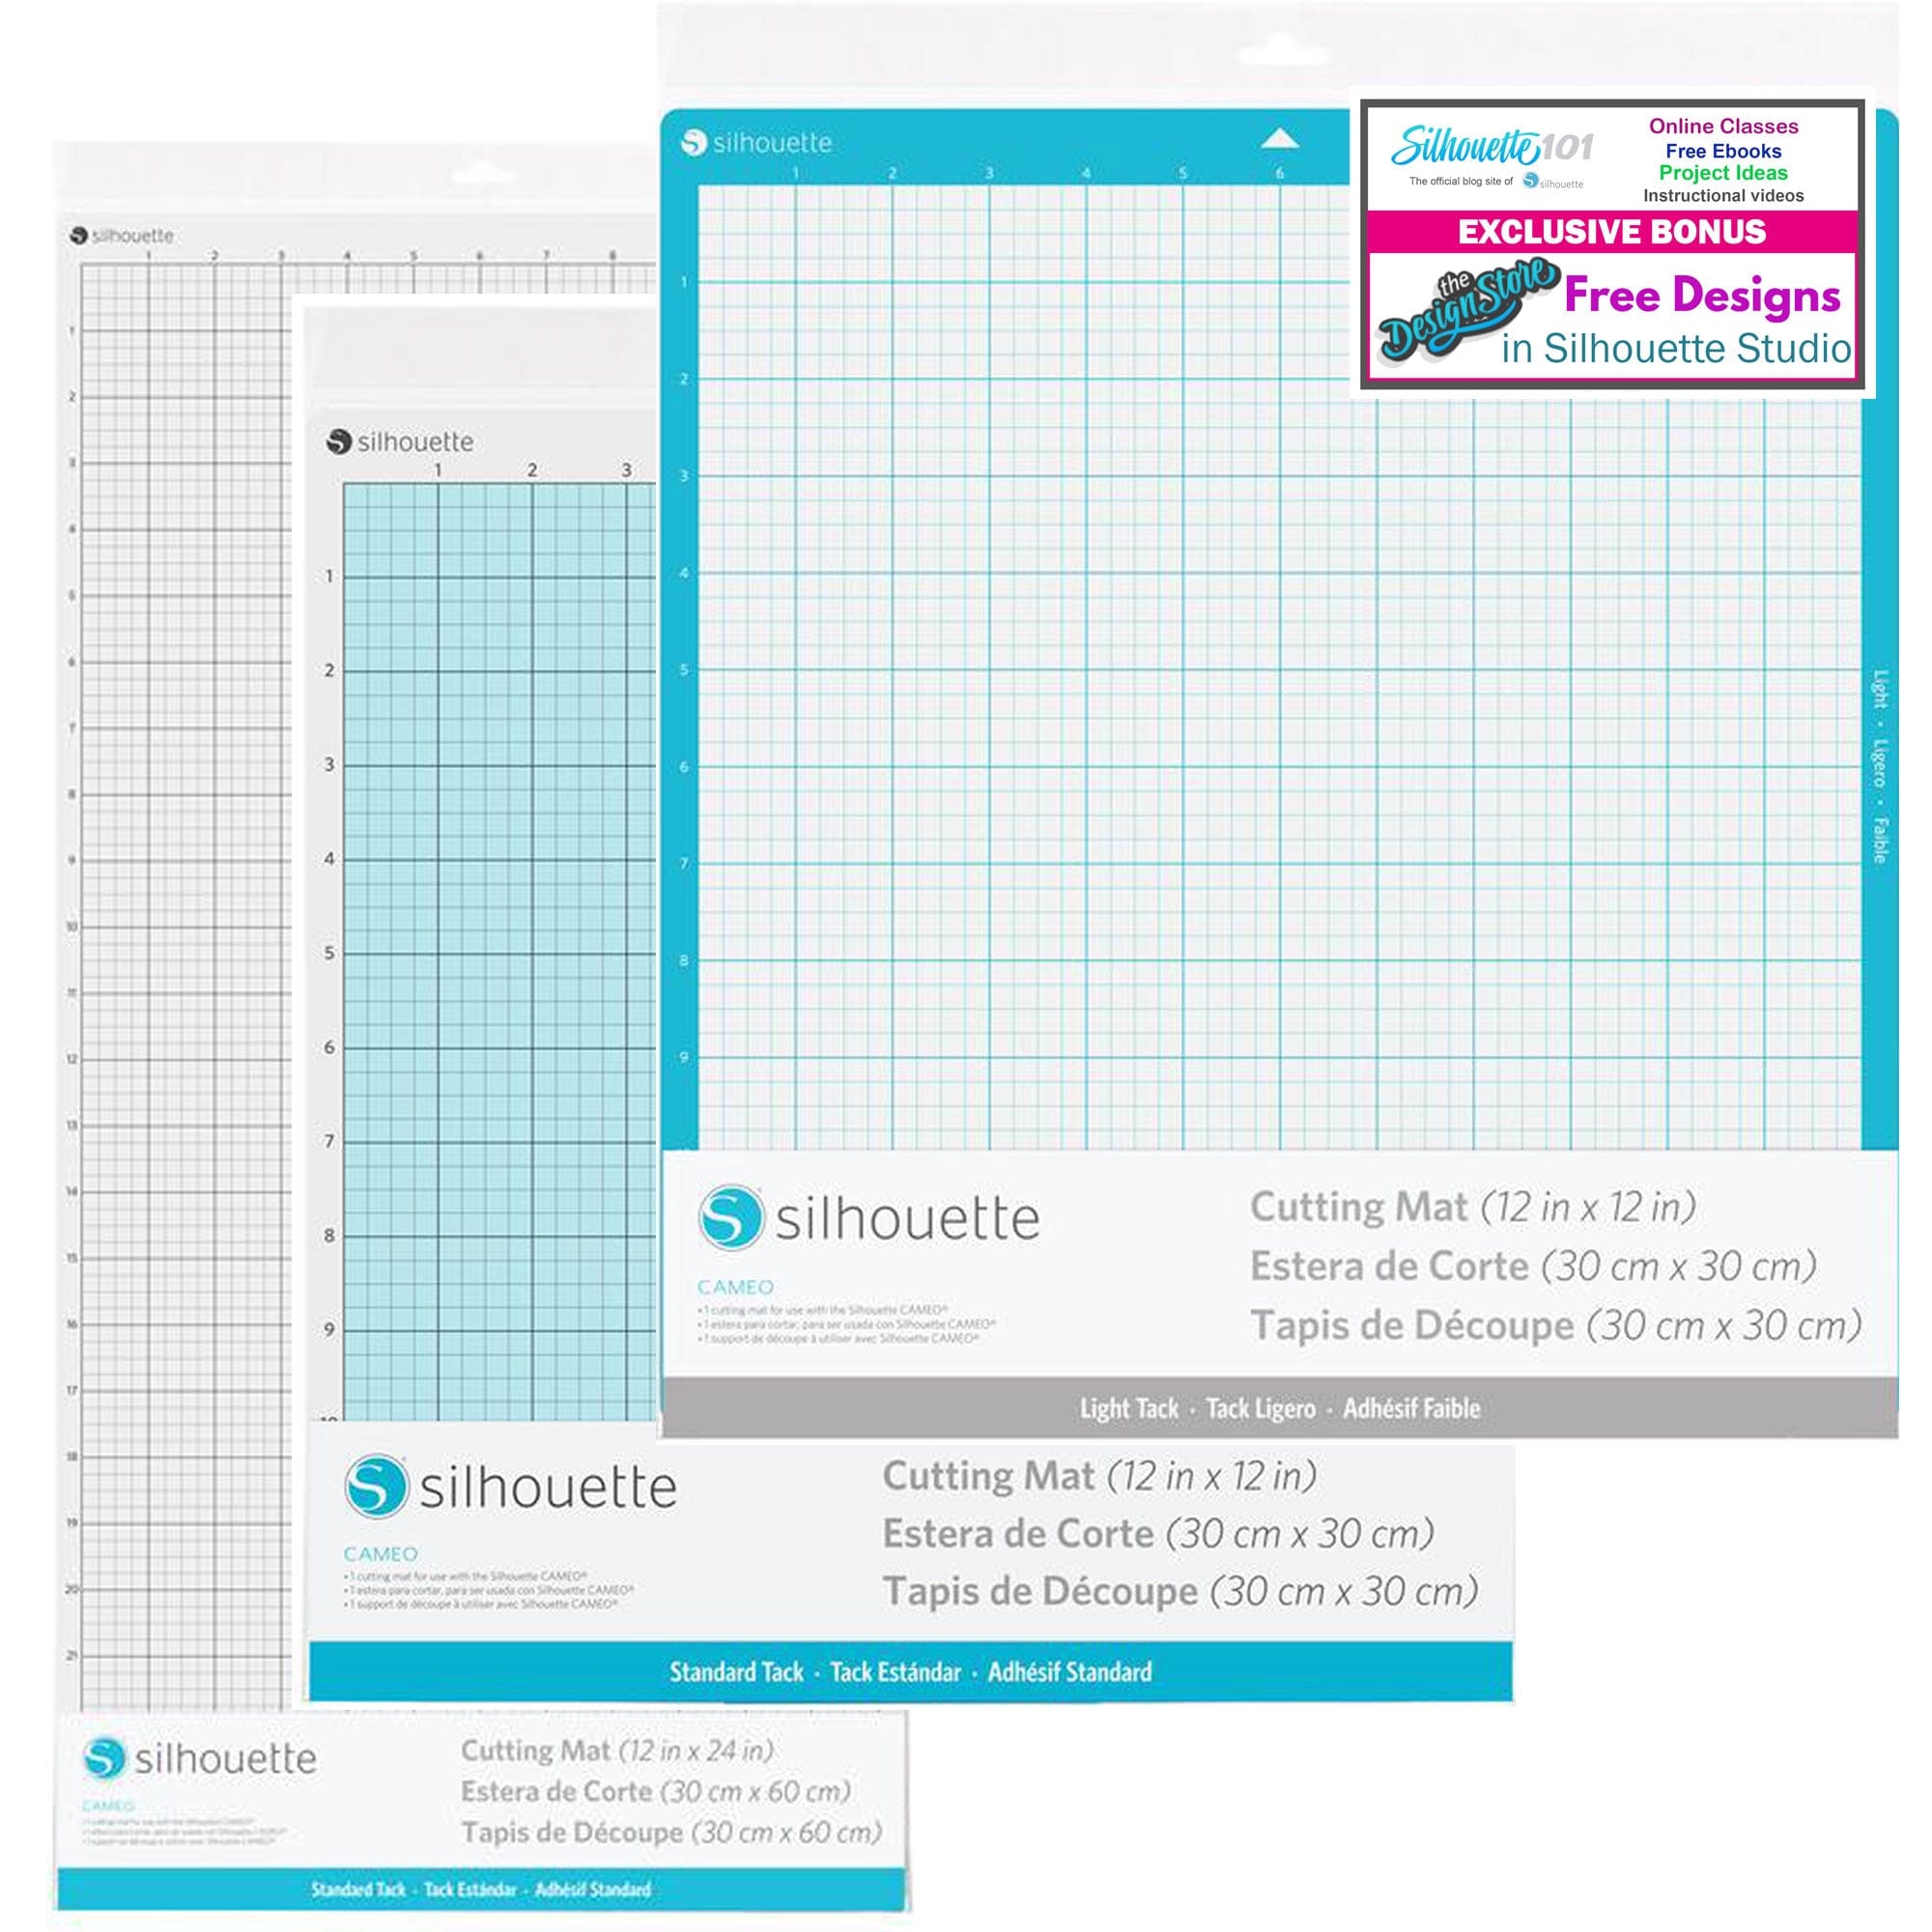 Silhouette America Blades & Cutting Mats Silhouette Cameo 3 Mat Variety Pack includes (1) 24 inch mat, (1) 12 inch Standard Mat, (1) 12 inch Light Hold Mat and  Free bonus Designs